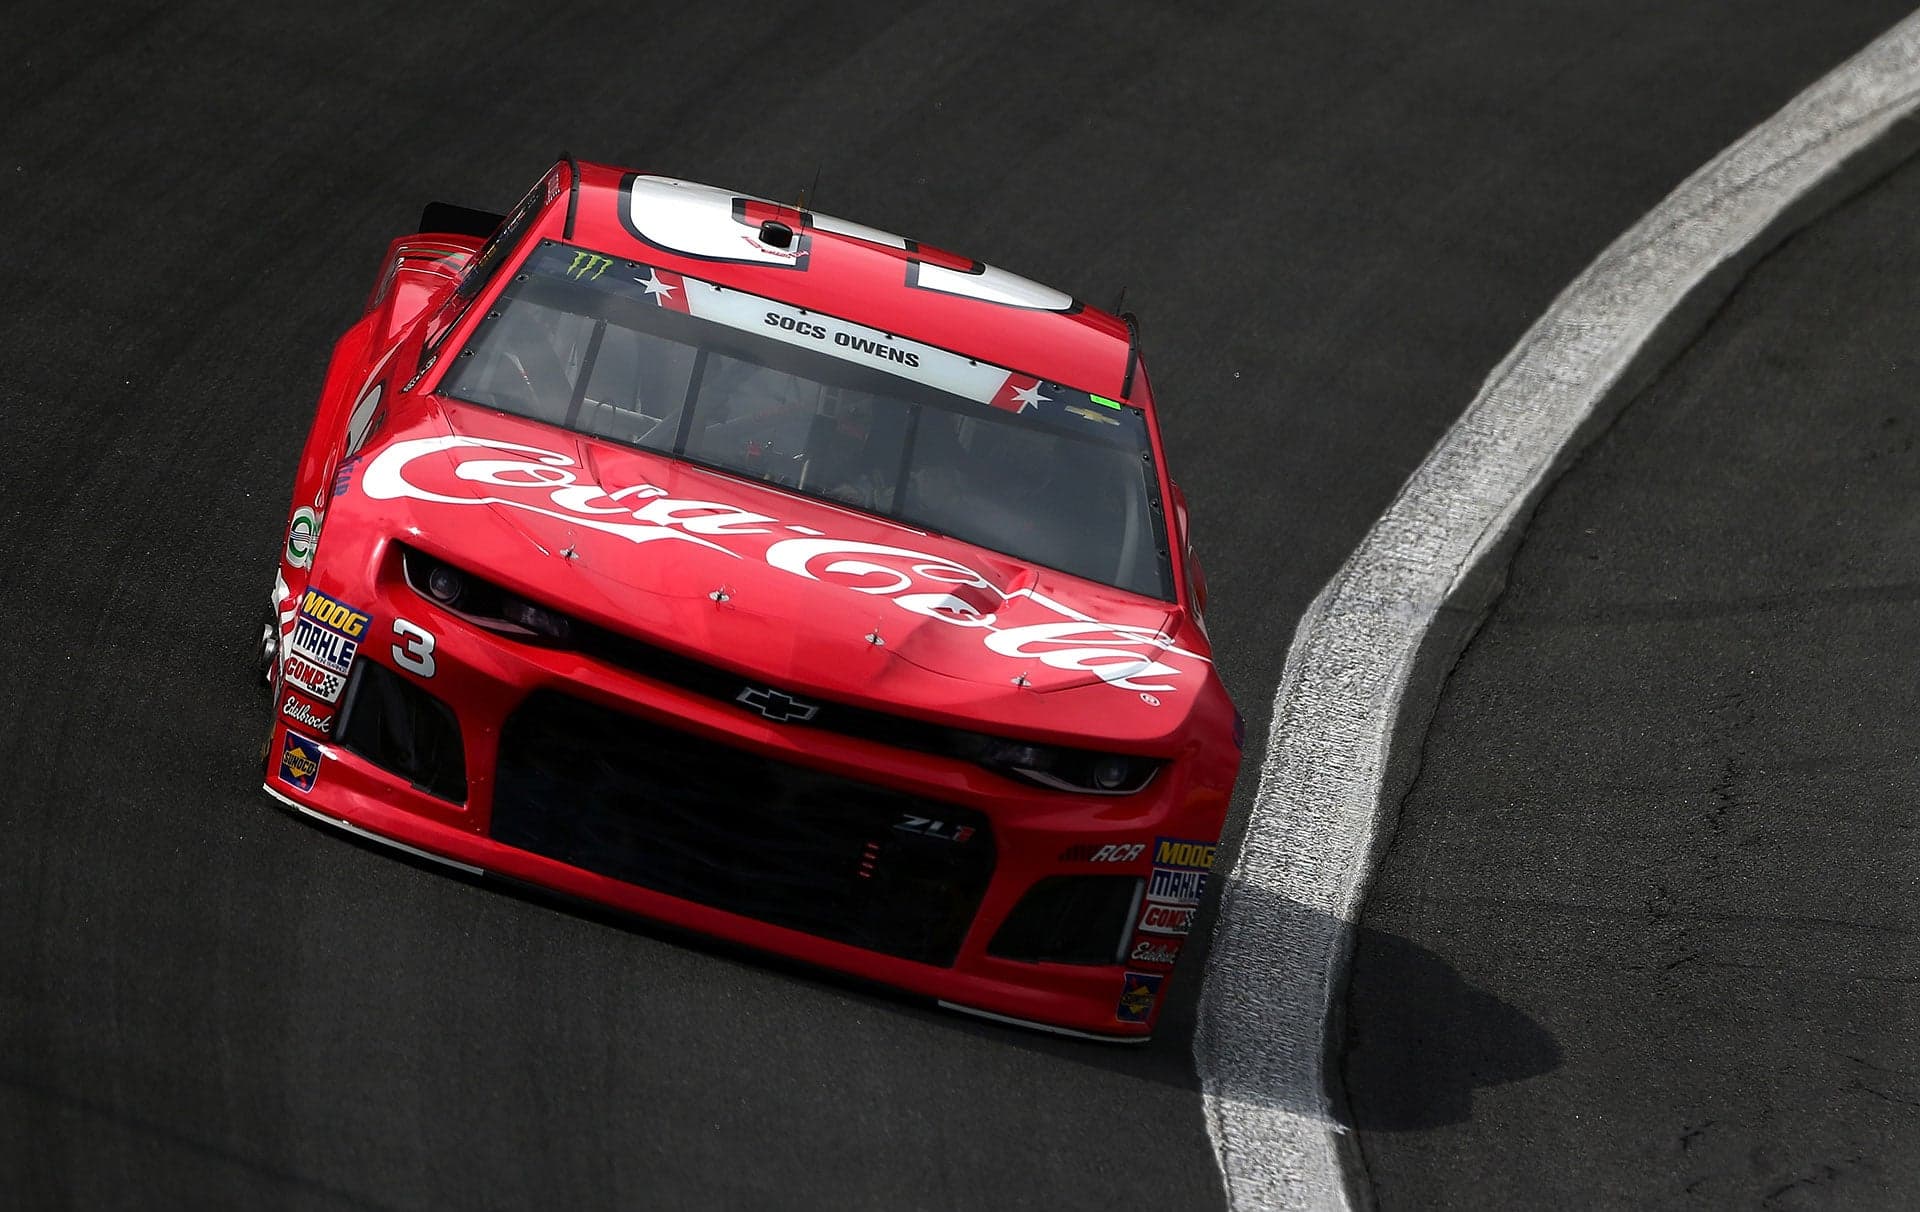 Preview: NASCAR Coca-Cola 600 at Charlotte Motor Speedway